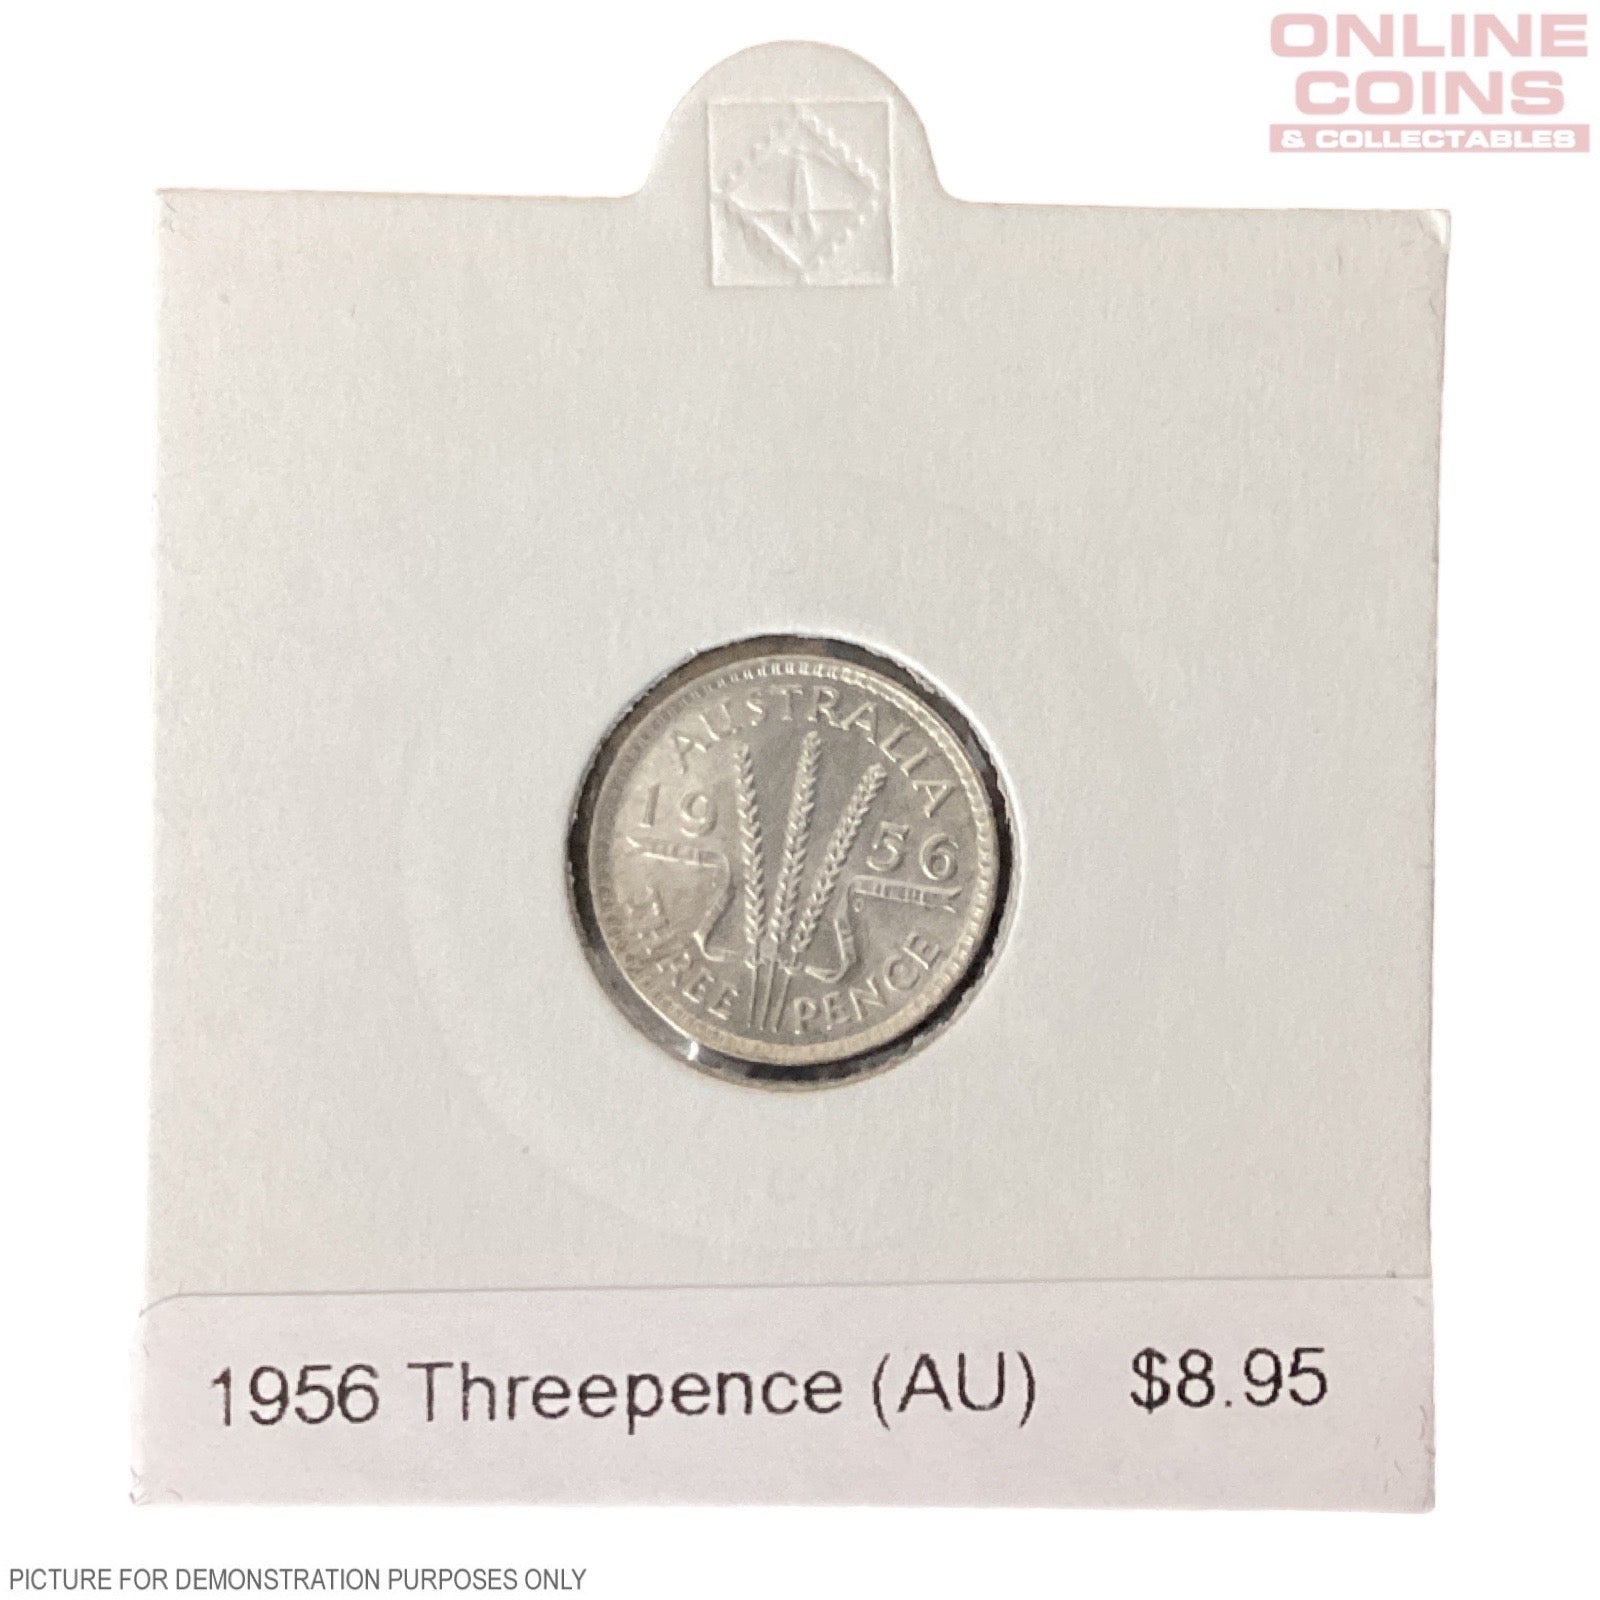 1956 Threepence (AU) stored in 2x2 coin holder